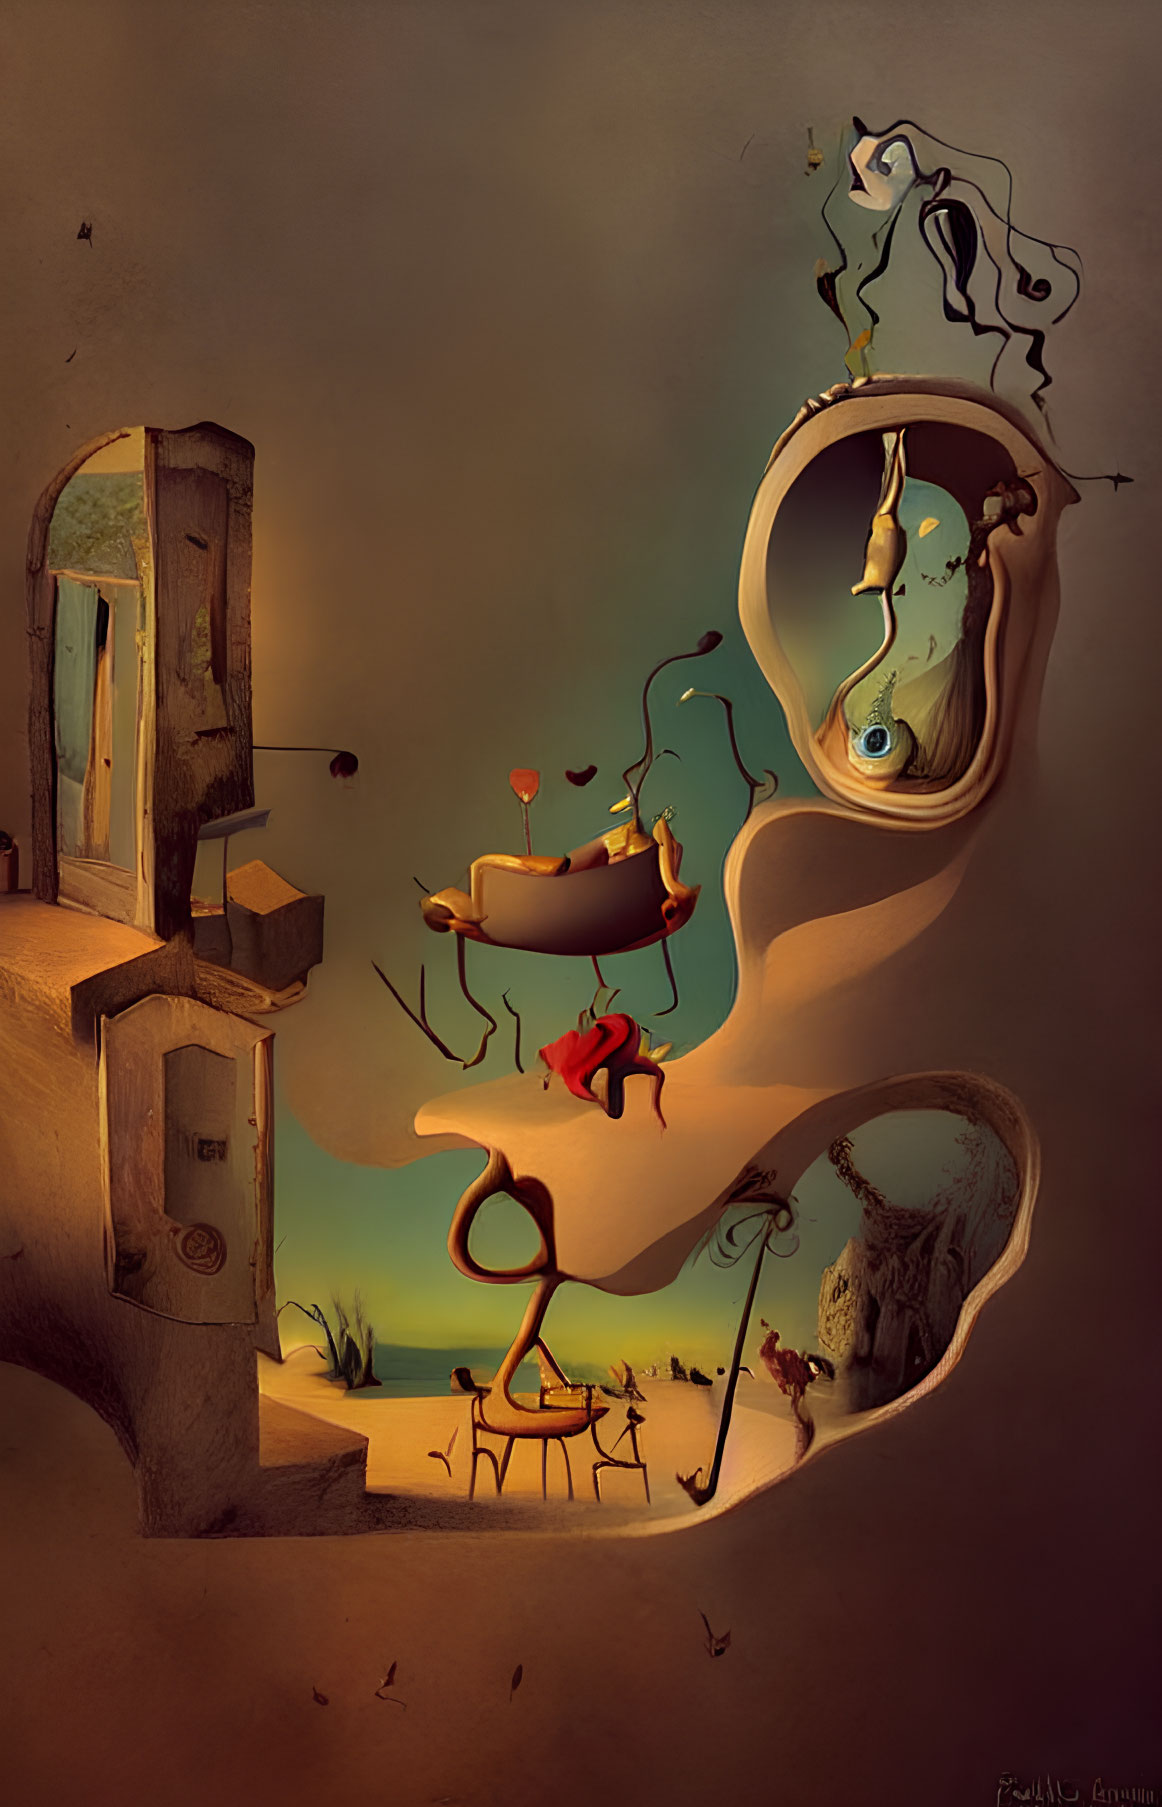 Surreal artwork featuring floating snake-like structures and keyholes in warm ambiance